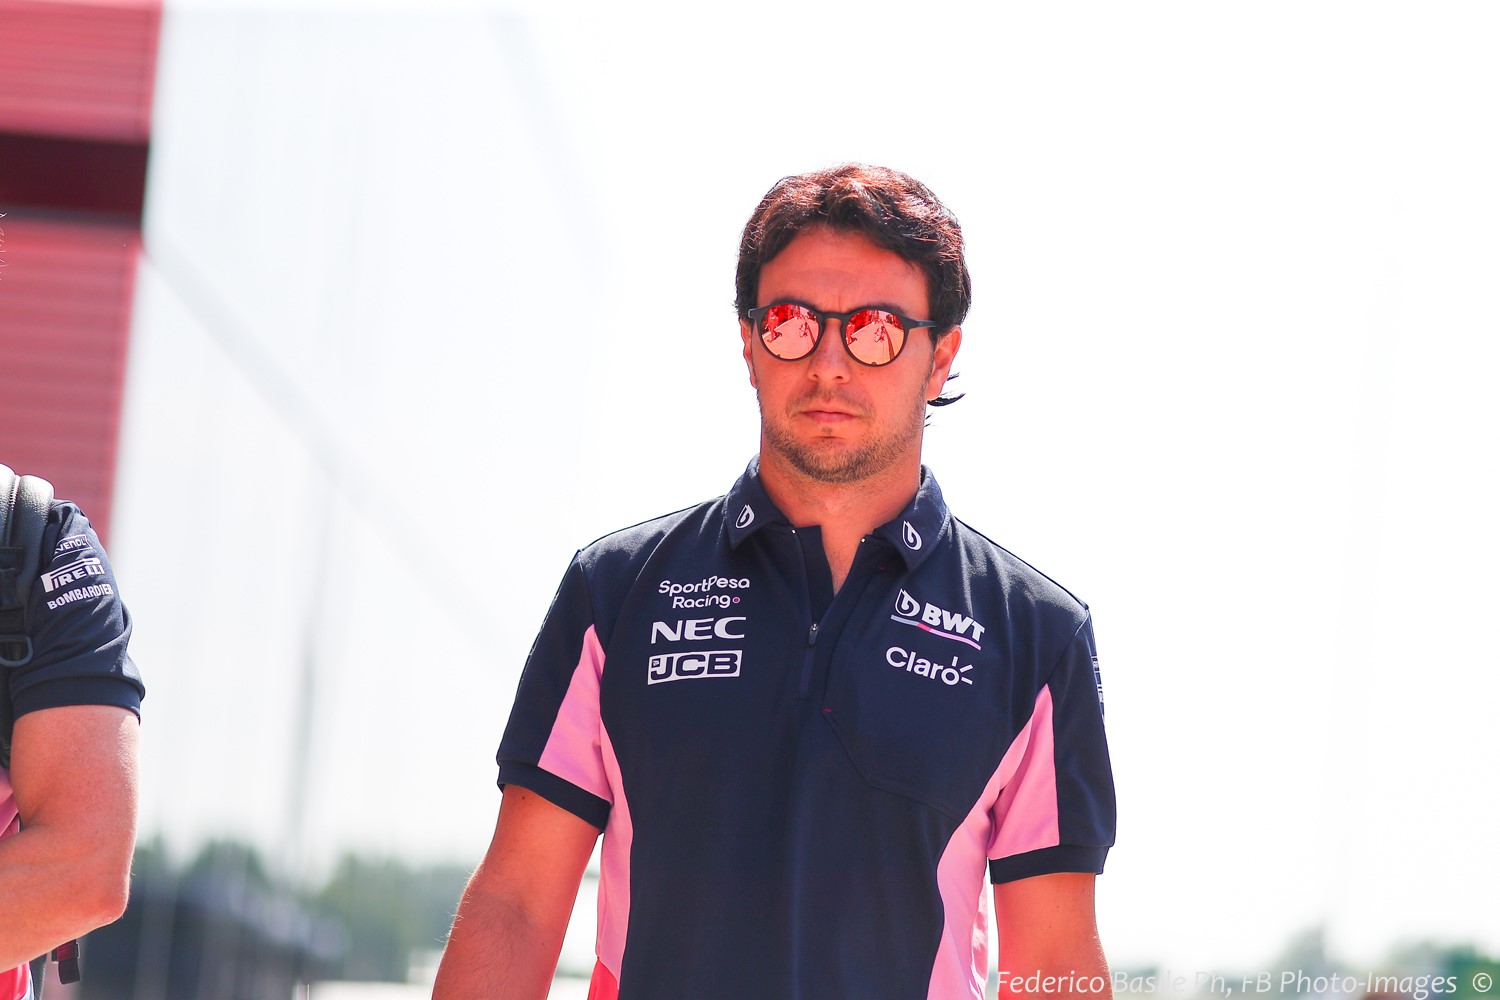 Sergio Perez arrives in Hockenhein Thursday looking for a new contract